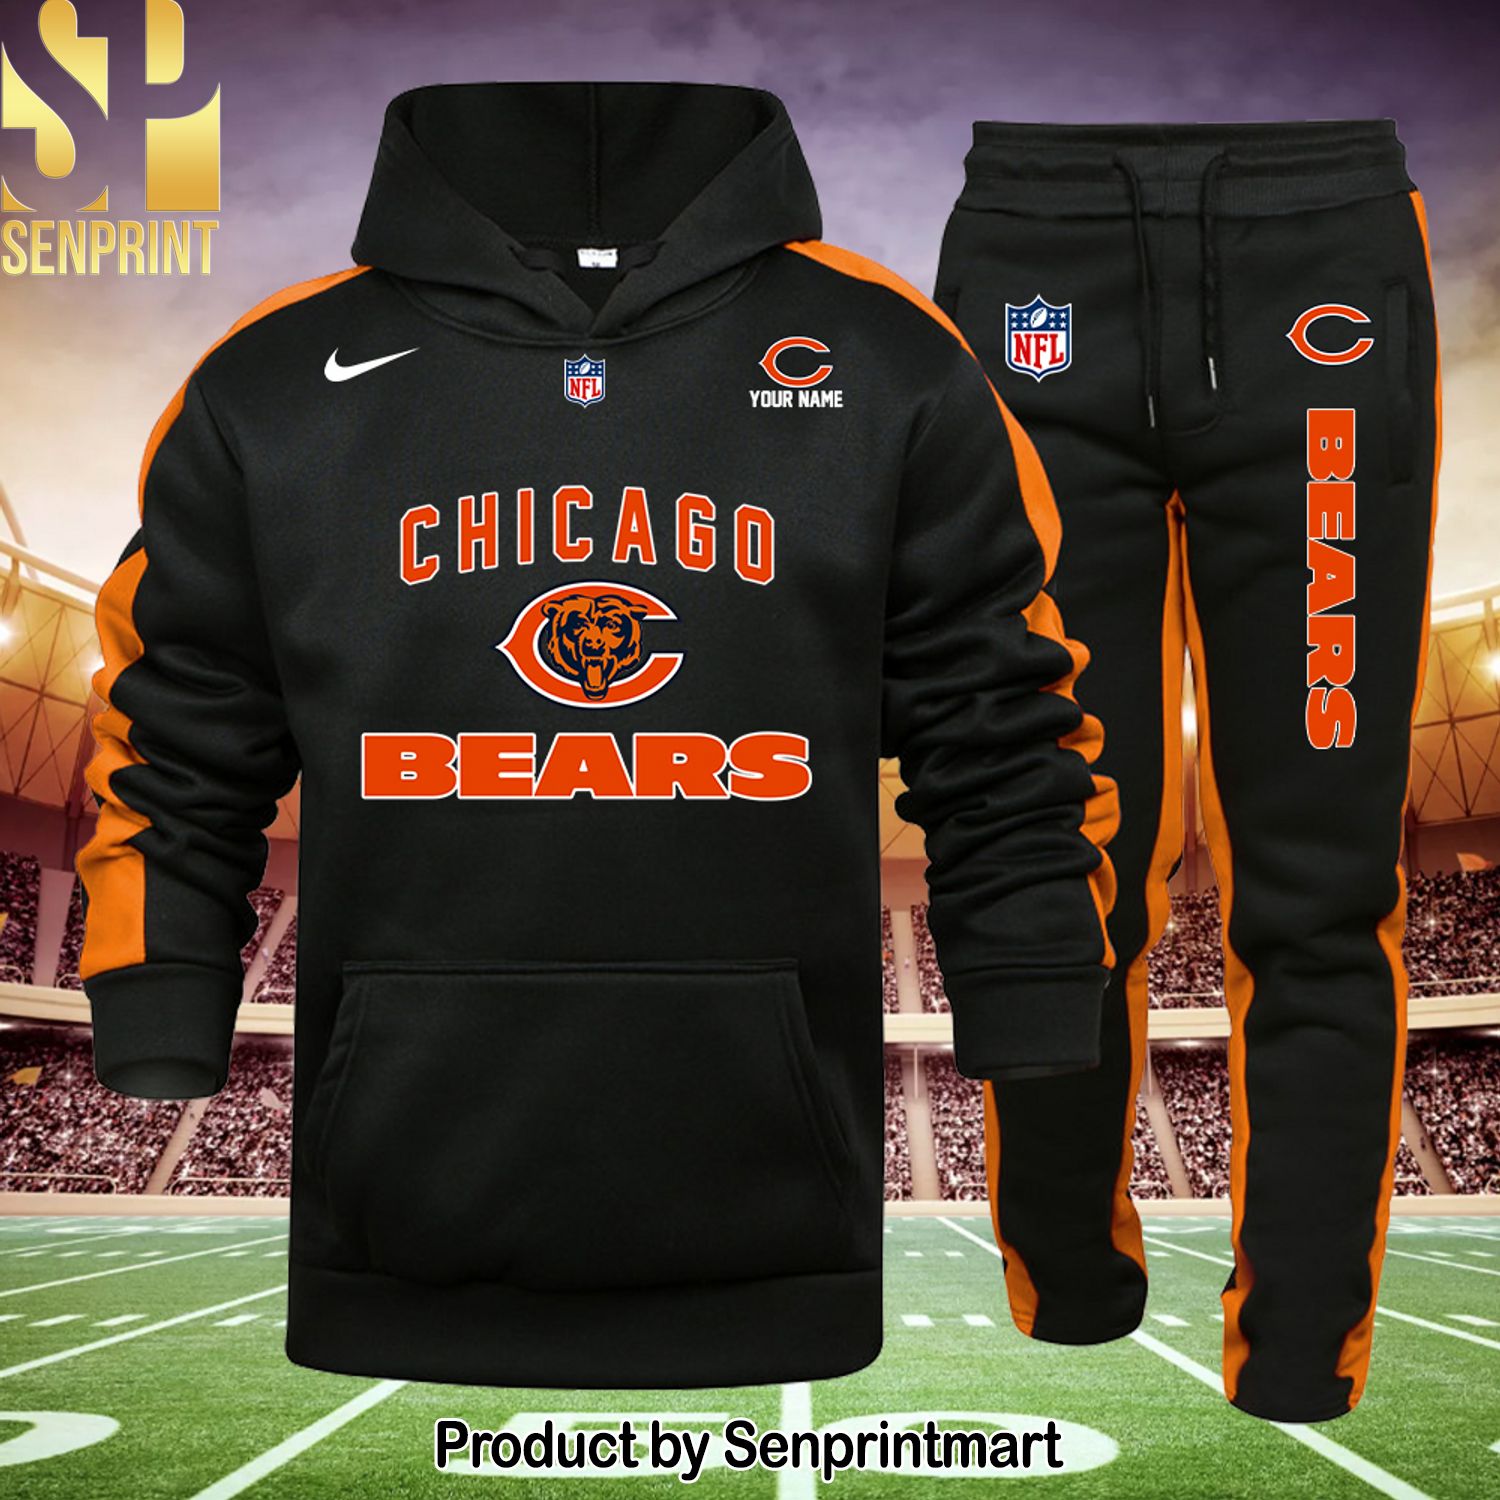 NFL Chicago Bears Hot Outfit All Over Print Shirt and Sweatpants